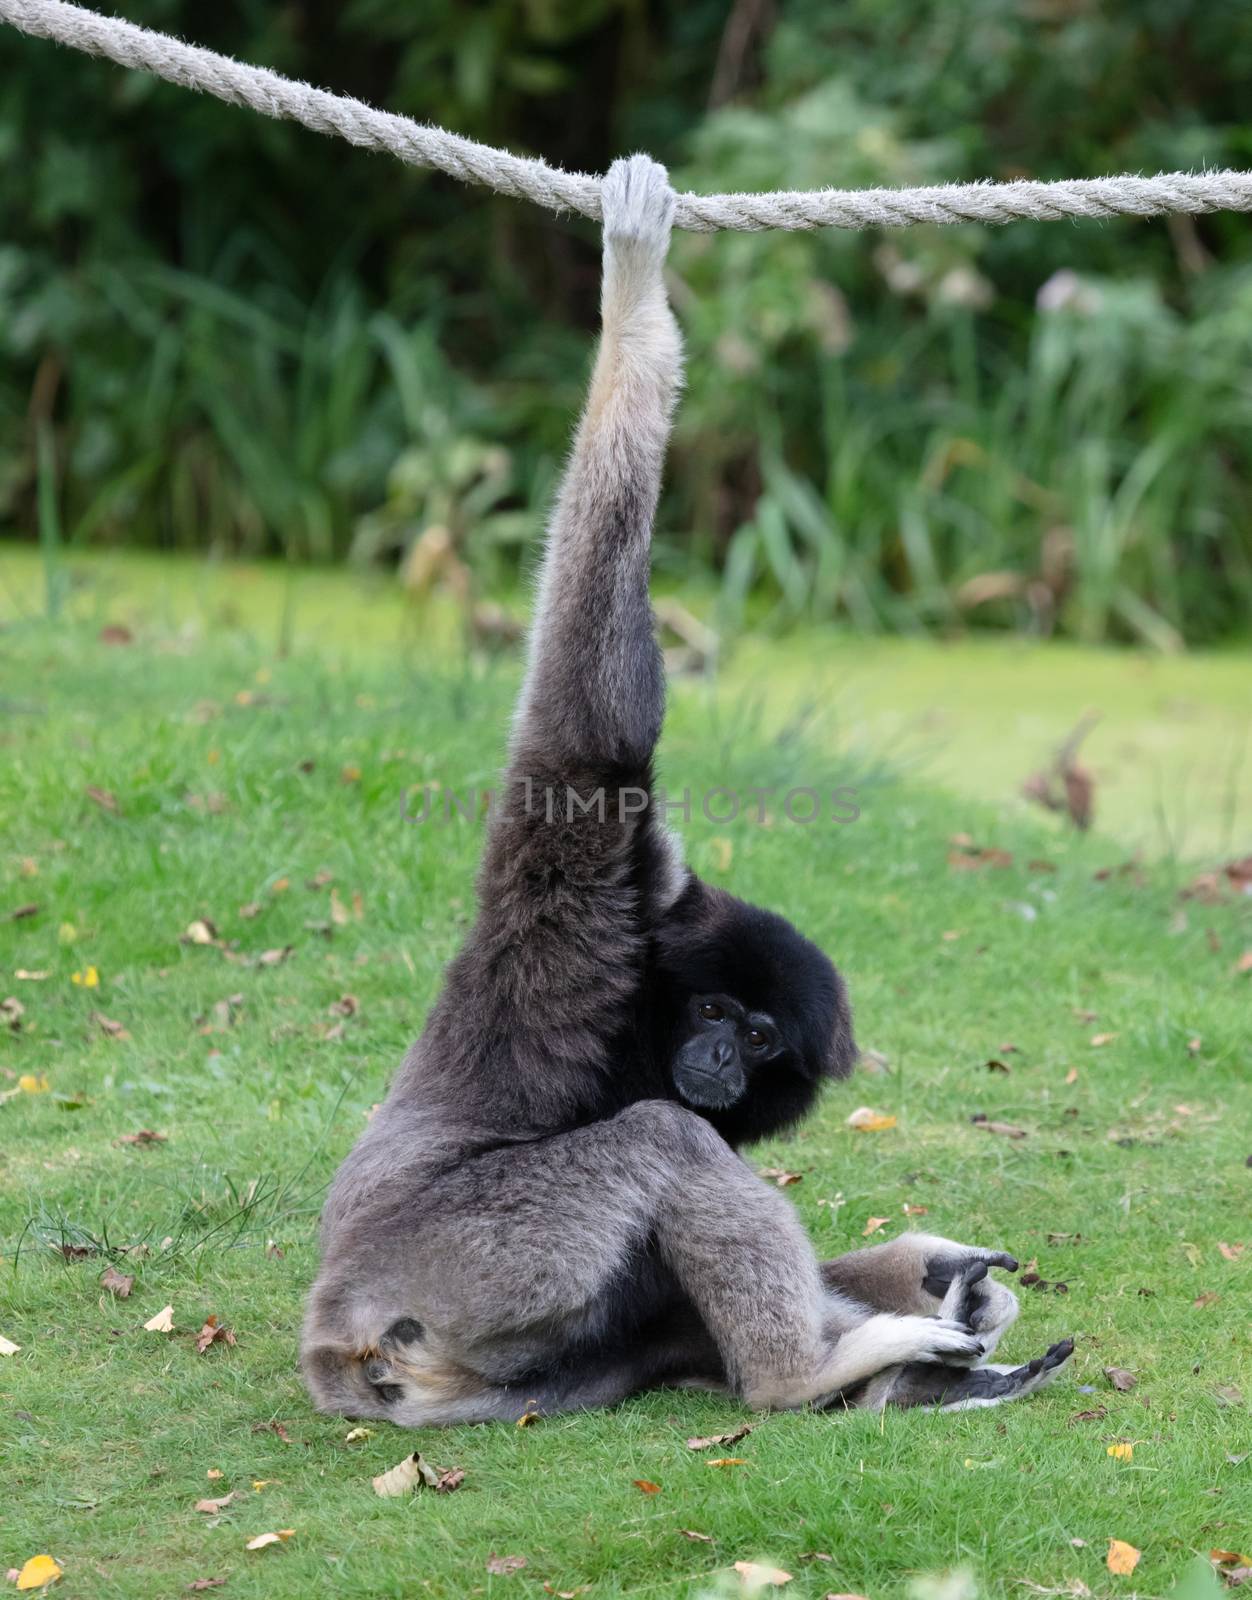 Silvery gibbon on the grass, hanging on a rope, selective focus